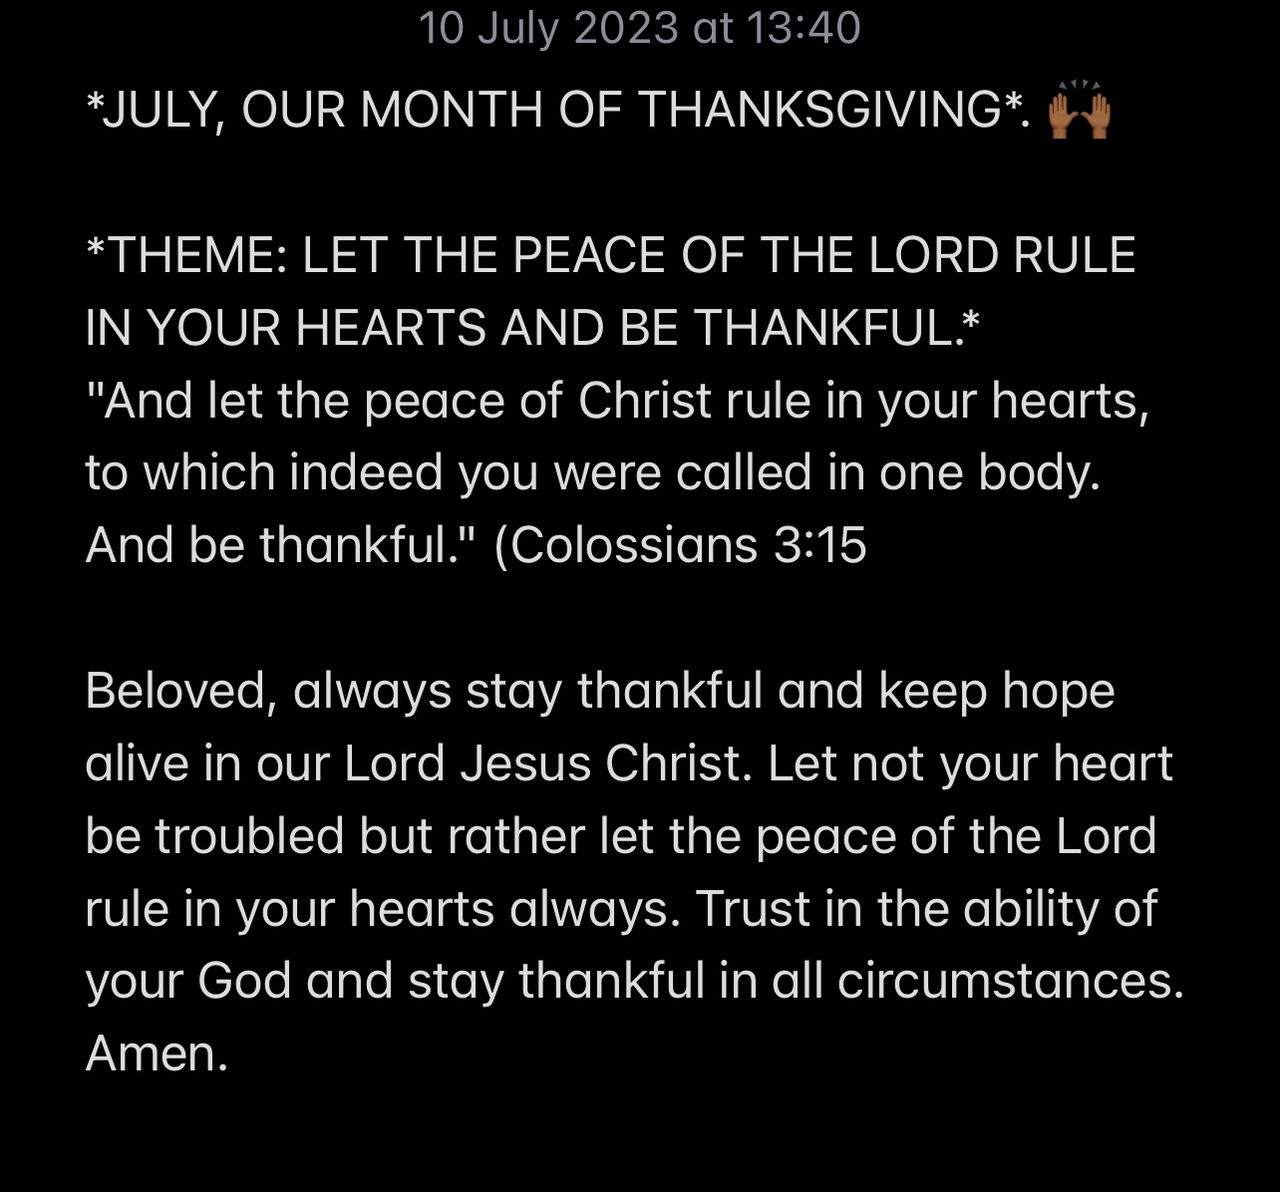 LET THE PEACE OF THE LORD RULE IN YOUR HEARTS AND BE THANKFUL.